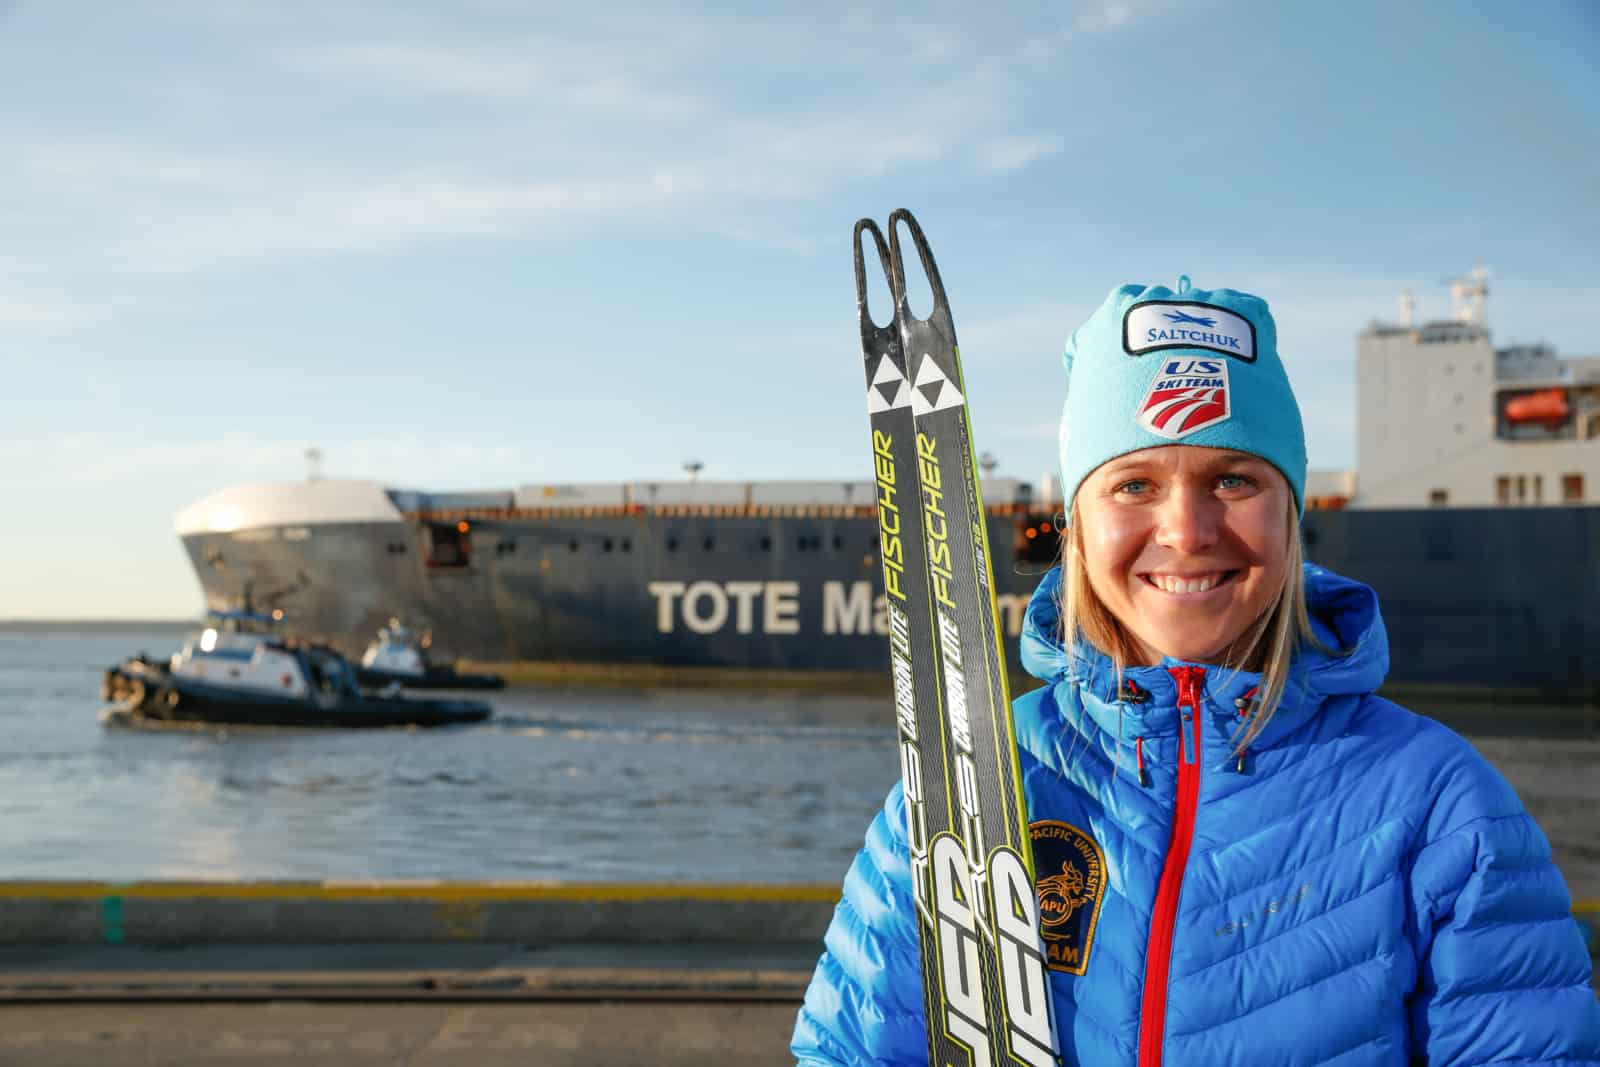 Sadie holds her skis in a puff coat in front of a TOTE maritime ship.